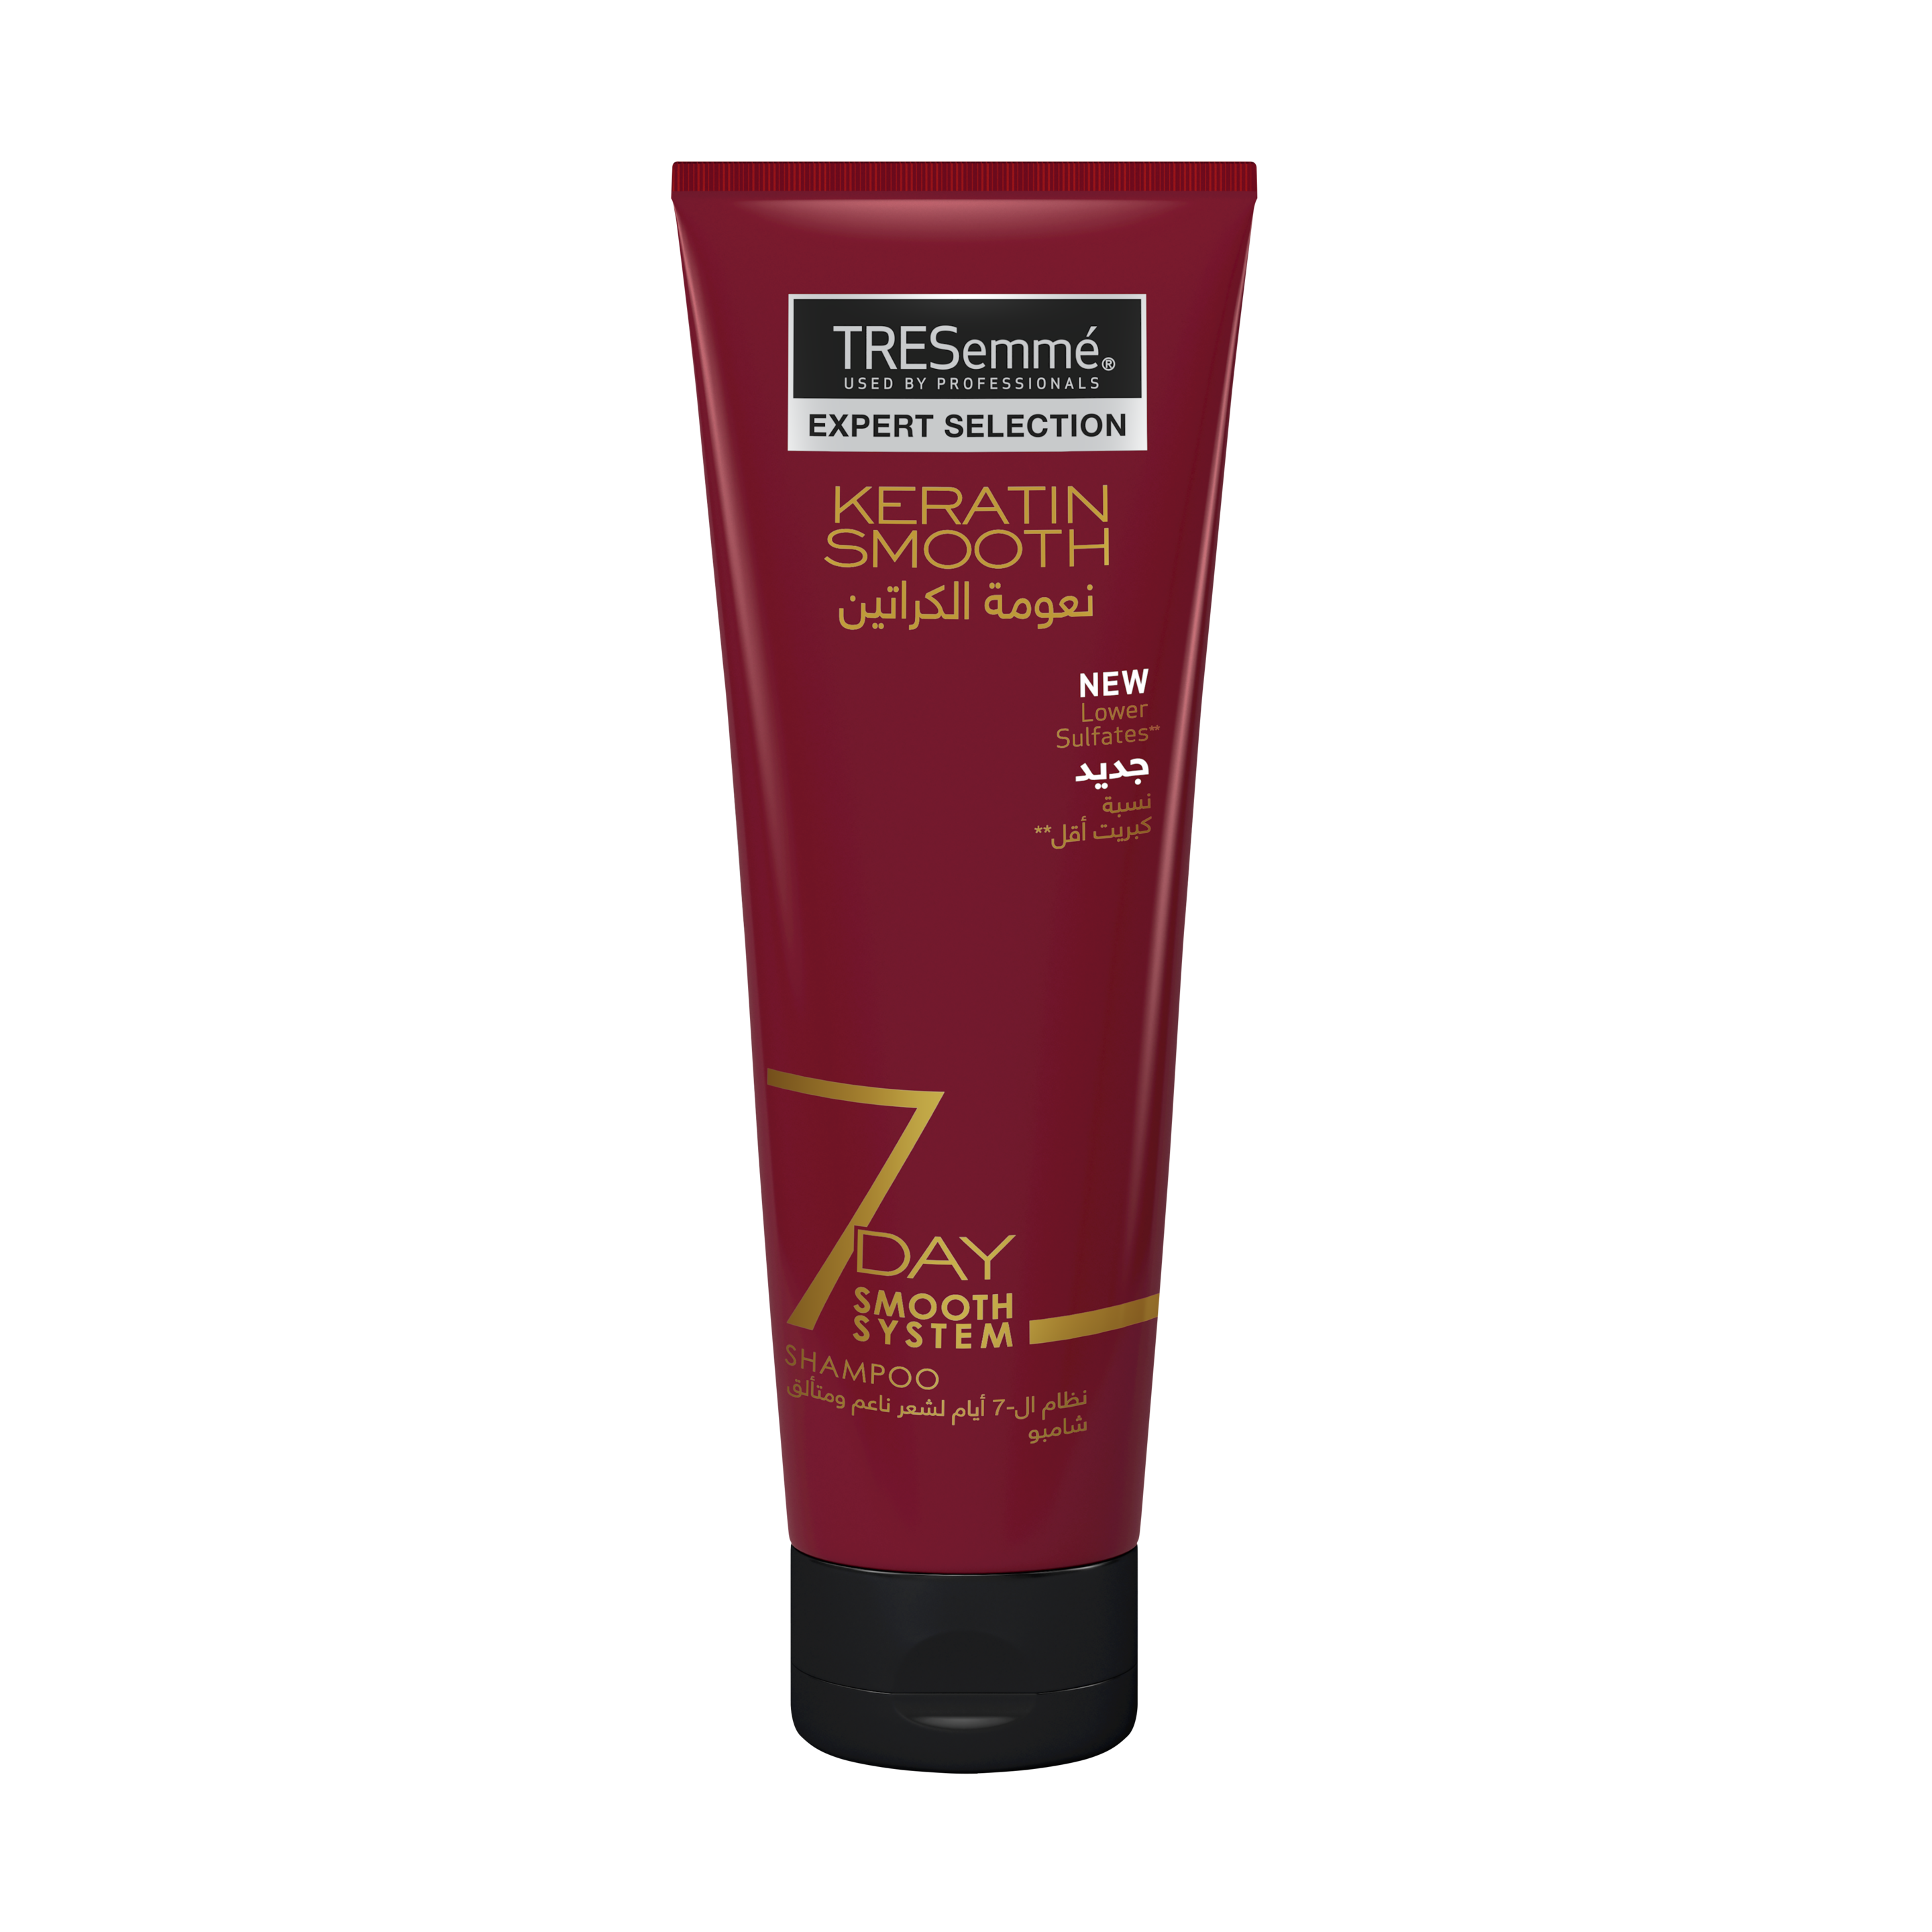 A 250ml tube of TRESemmé 7-Day Smooth Shampoo front of pack image